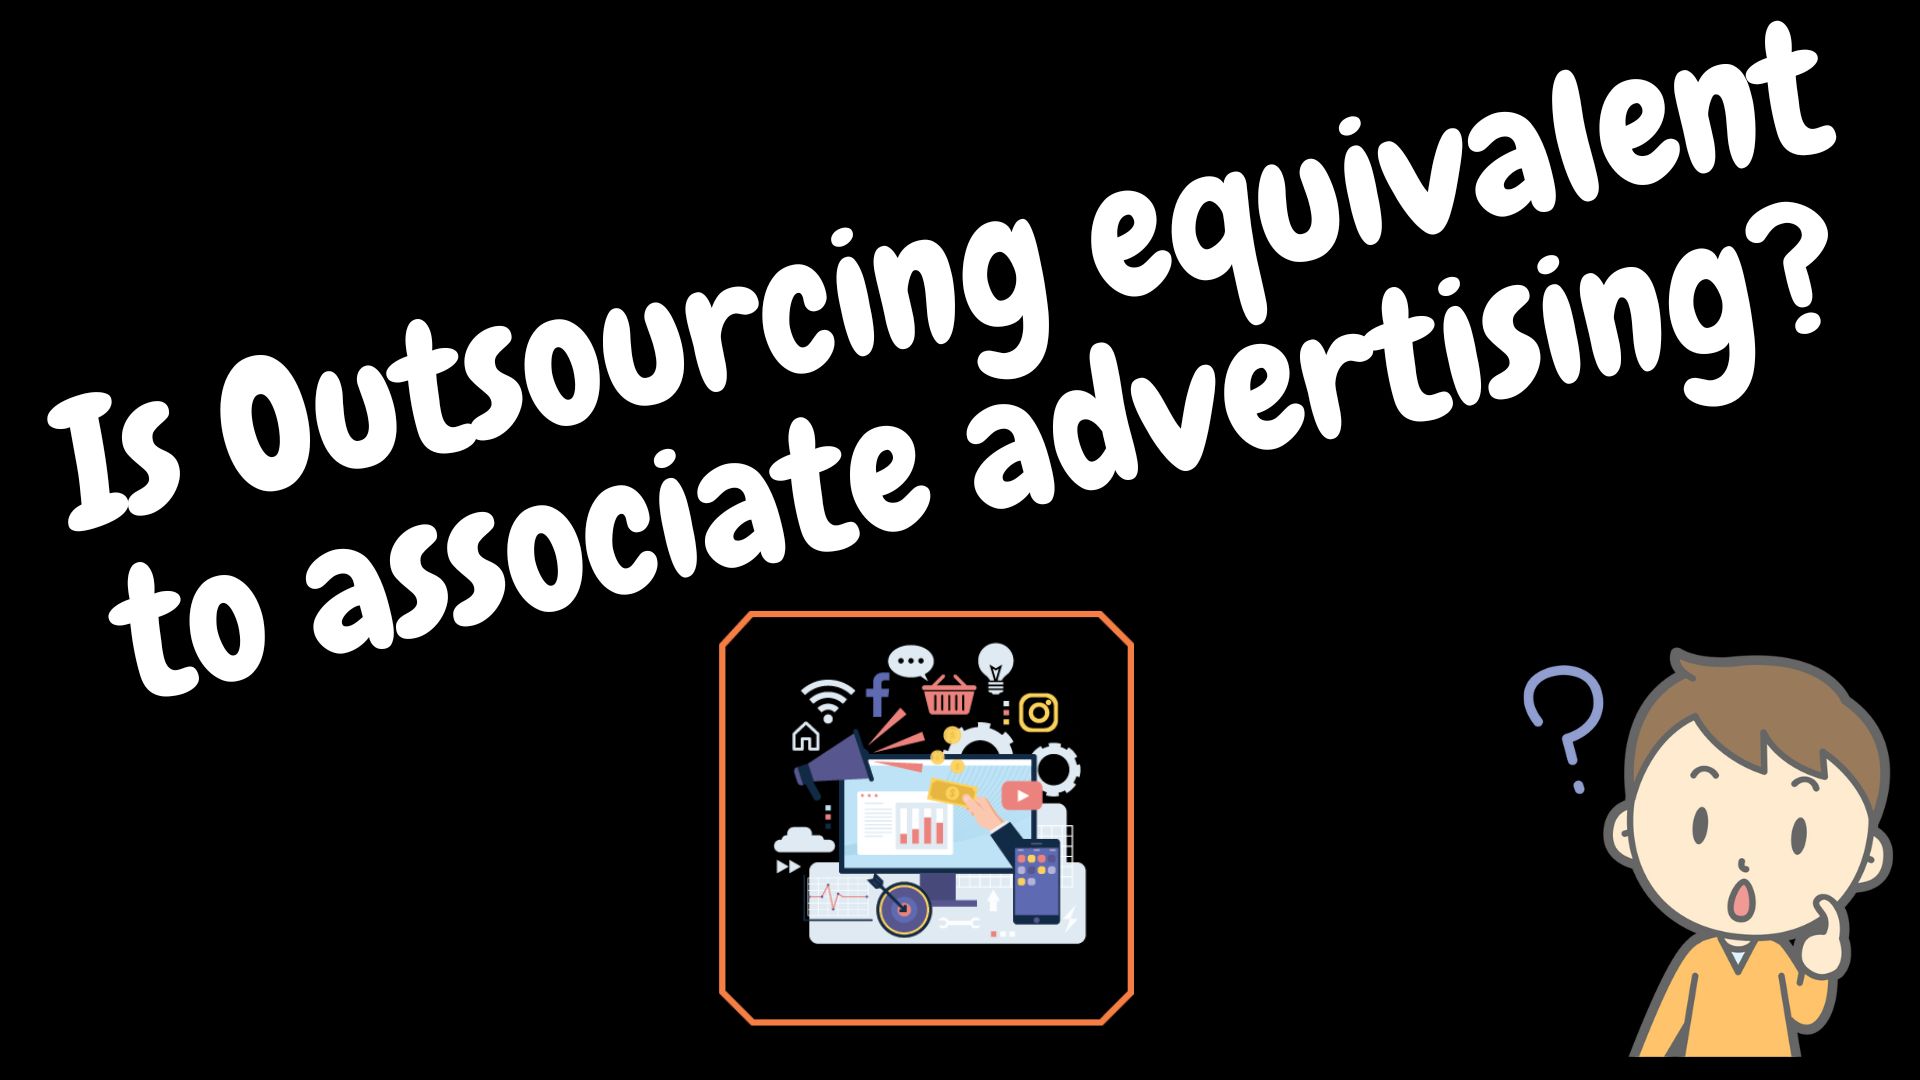 Is outsourcing equivalent to associate advertising?